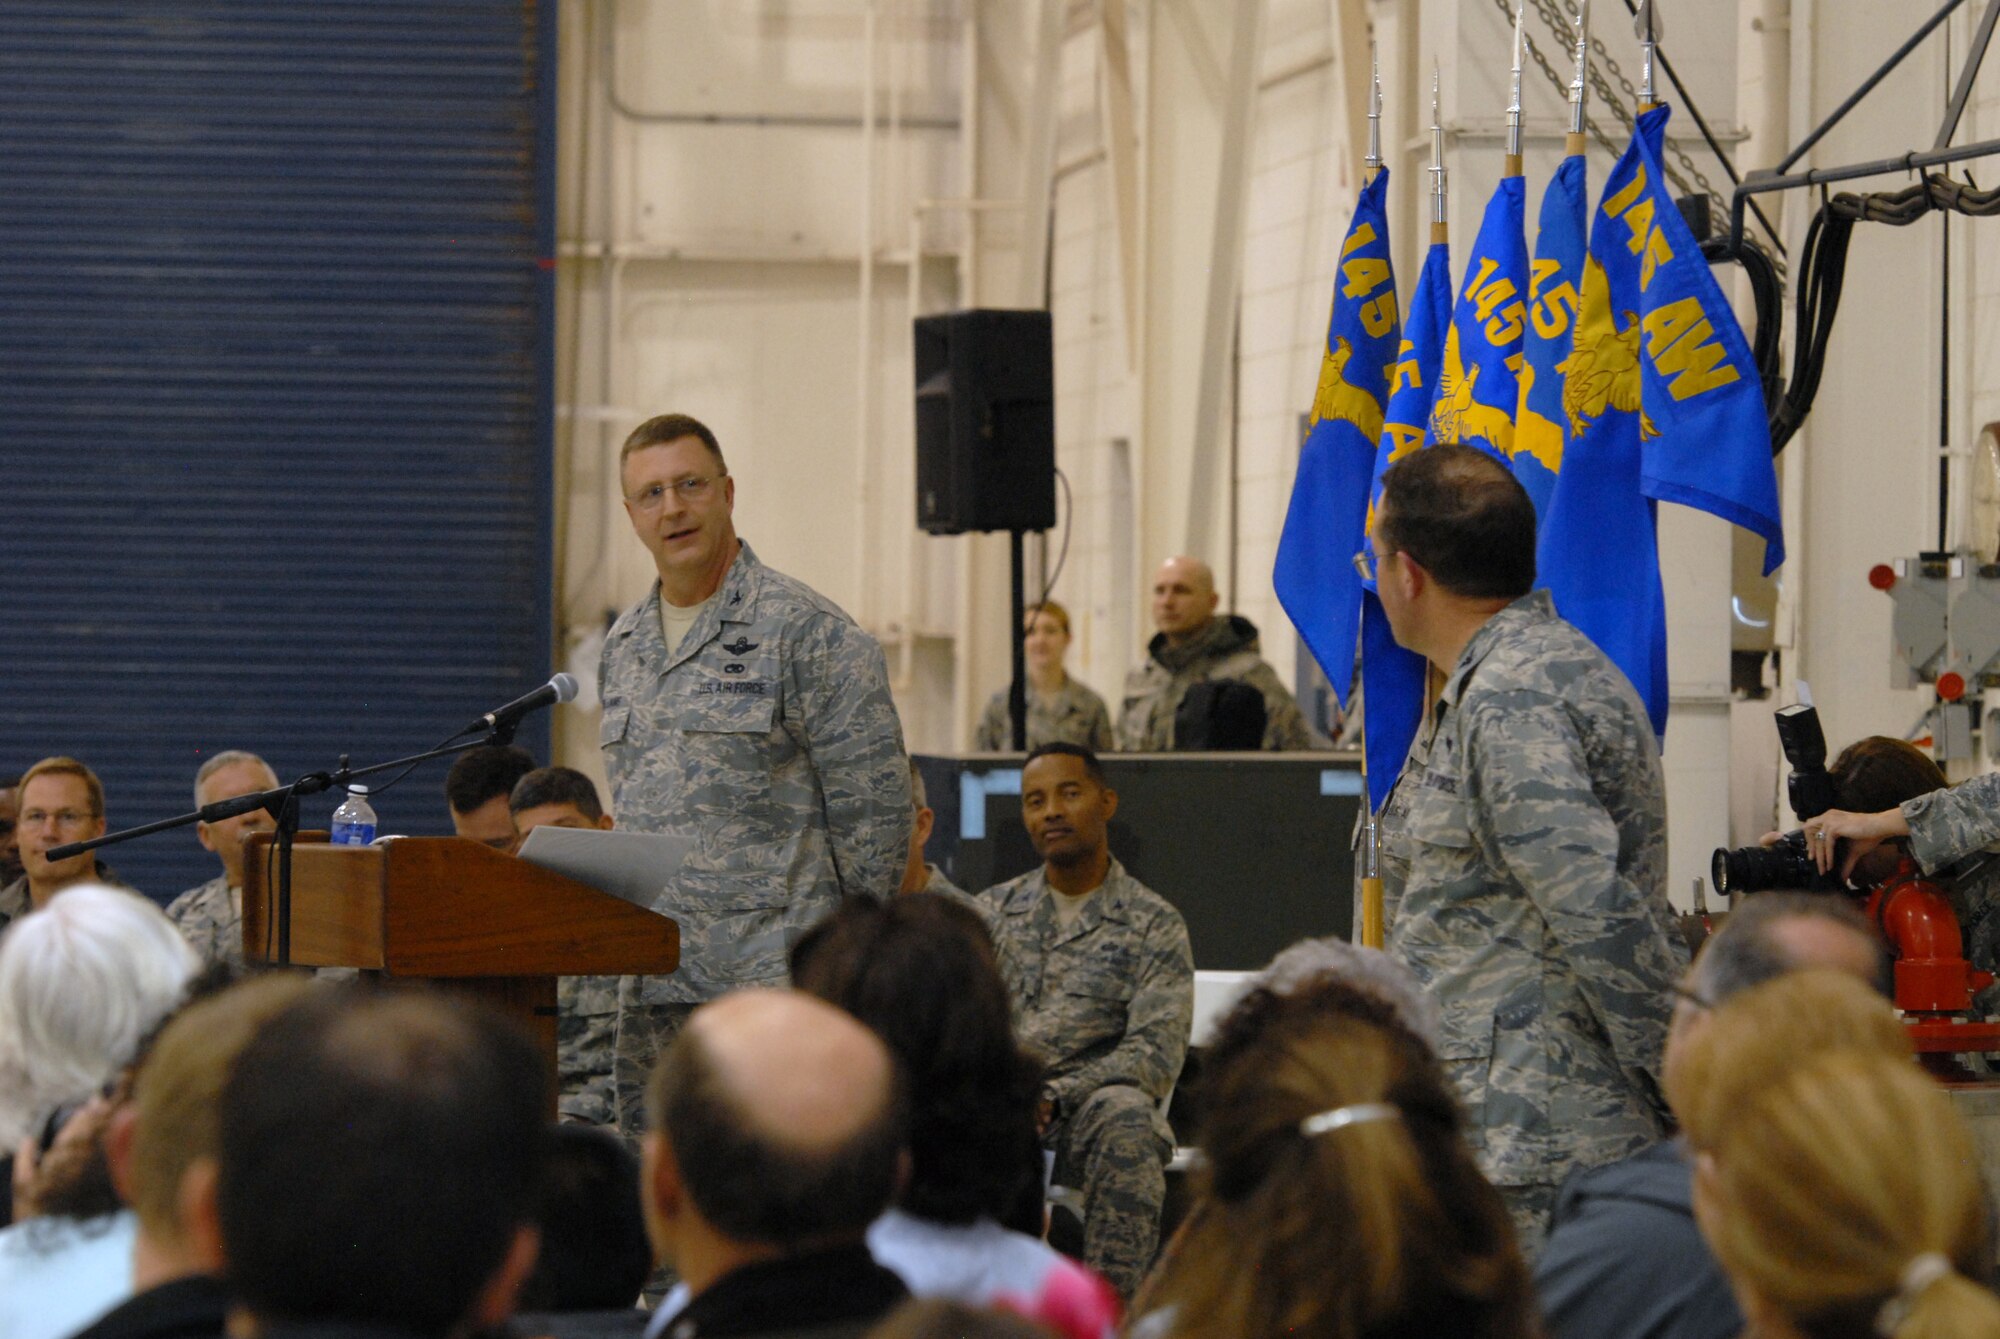 U.S. Air Force Col. Roger E. Williams, commander of the 145th Airlift Wing, gives accolades to Vice-Wing Commander, Col Quincy N. Huneycutt, during a Change of Command ceremony. Huneycutt relinquished his command of the 145th Mission Support Group. The CoC ceremony was at the North Carolina Air National Guard base, Charlotte-Douglas Intl. airport, Jan. 11, 2014. (U.S. National Guard photo by Senior Airman Laura Montgomery/Released)